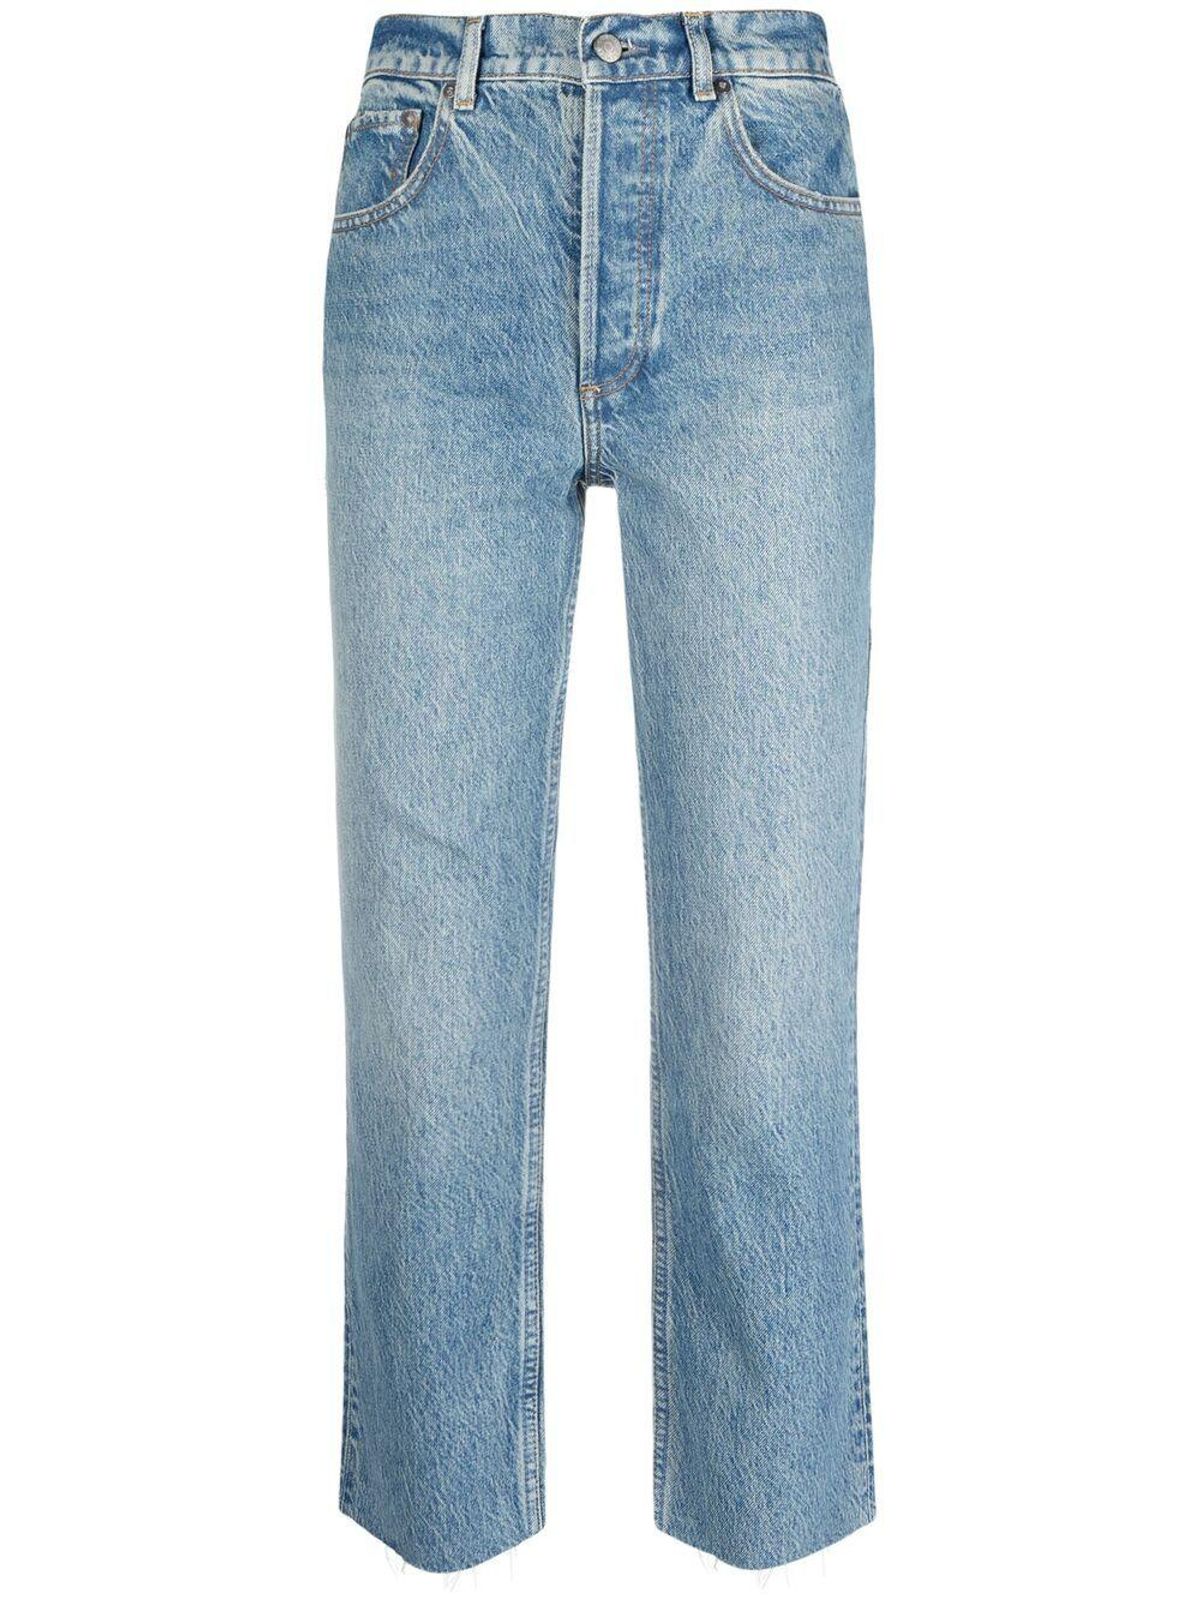 Darcy Pop Cropped Jeans